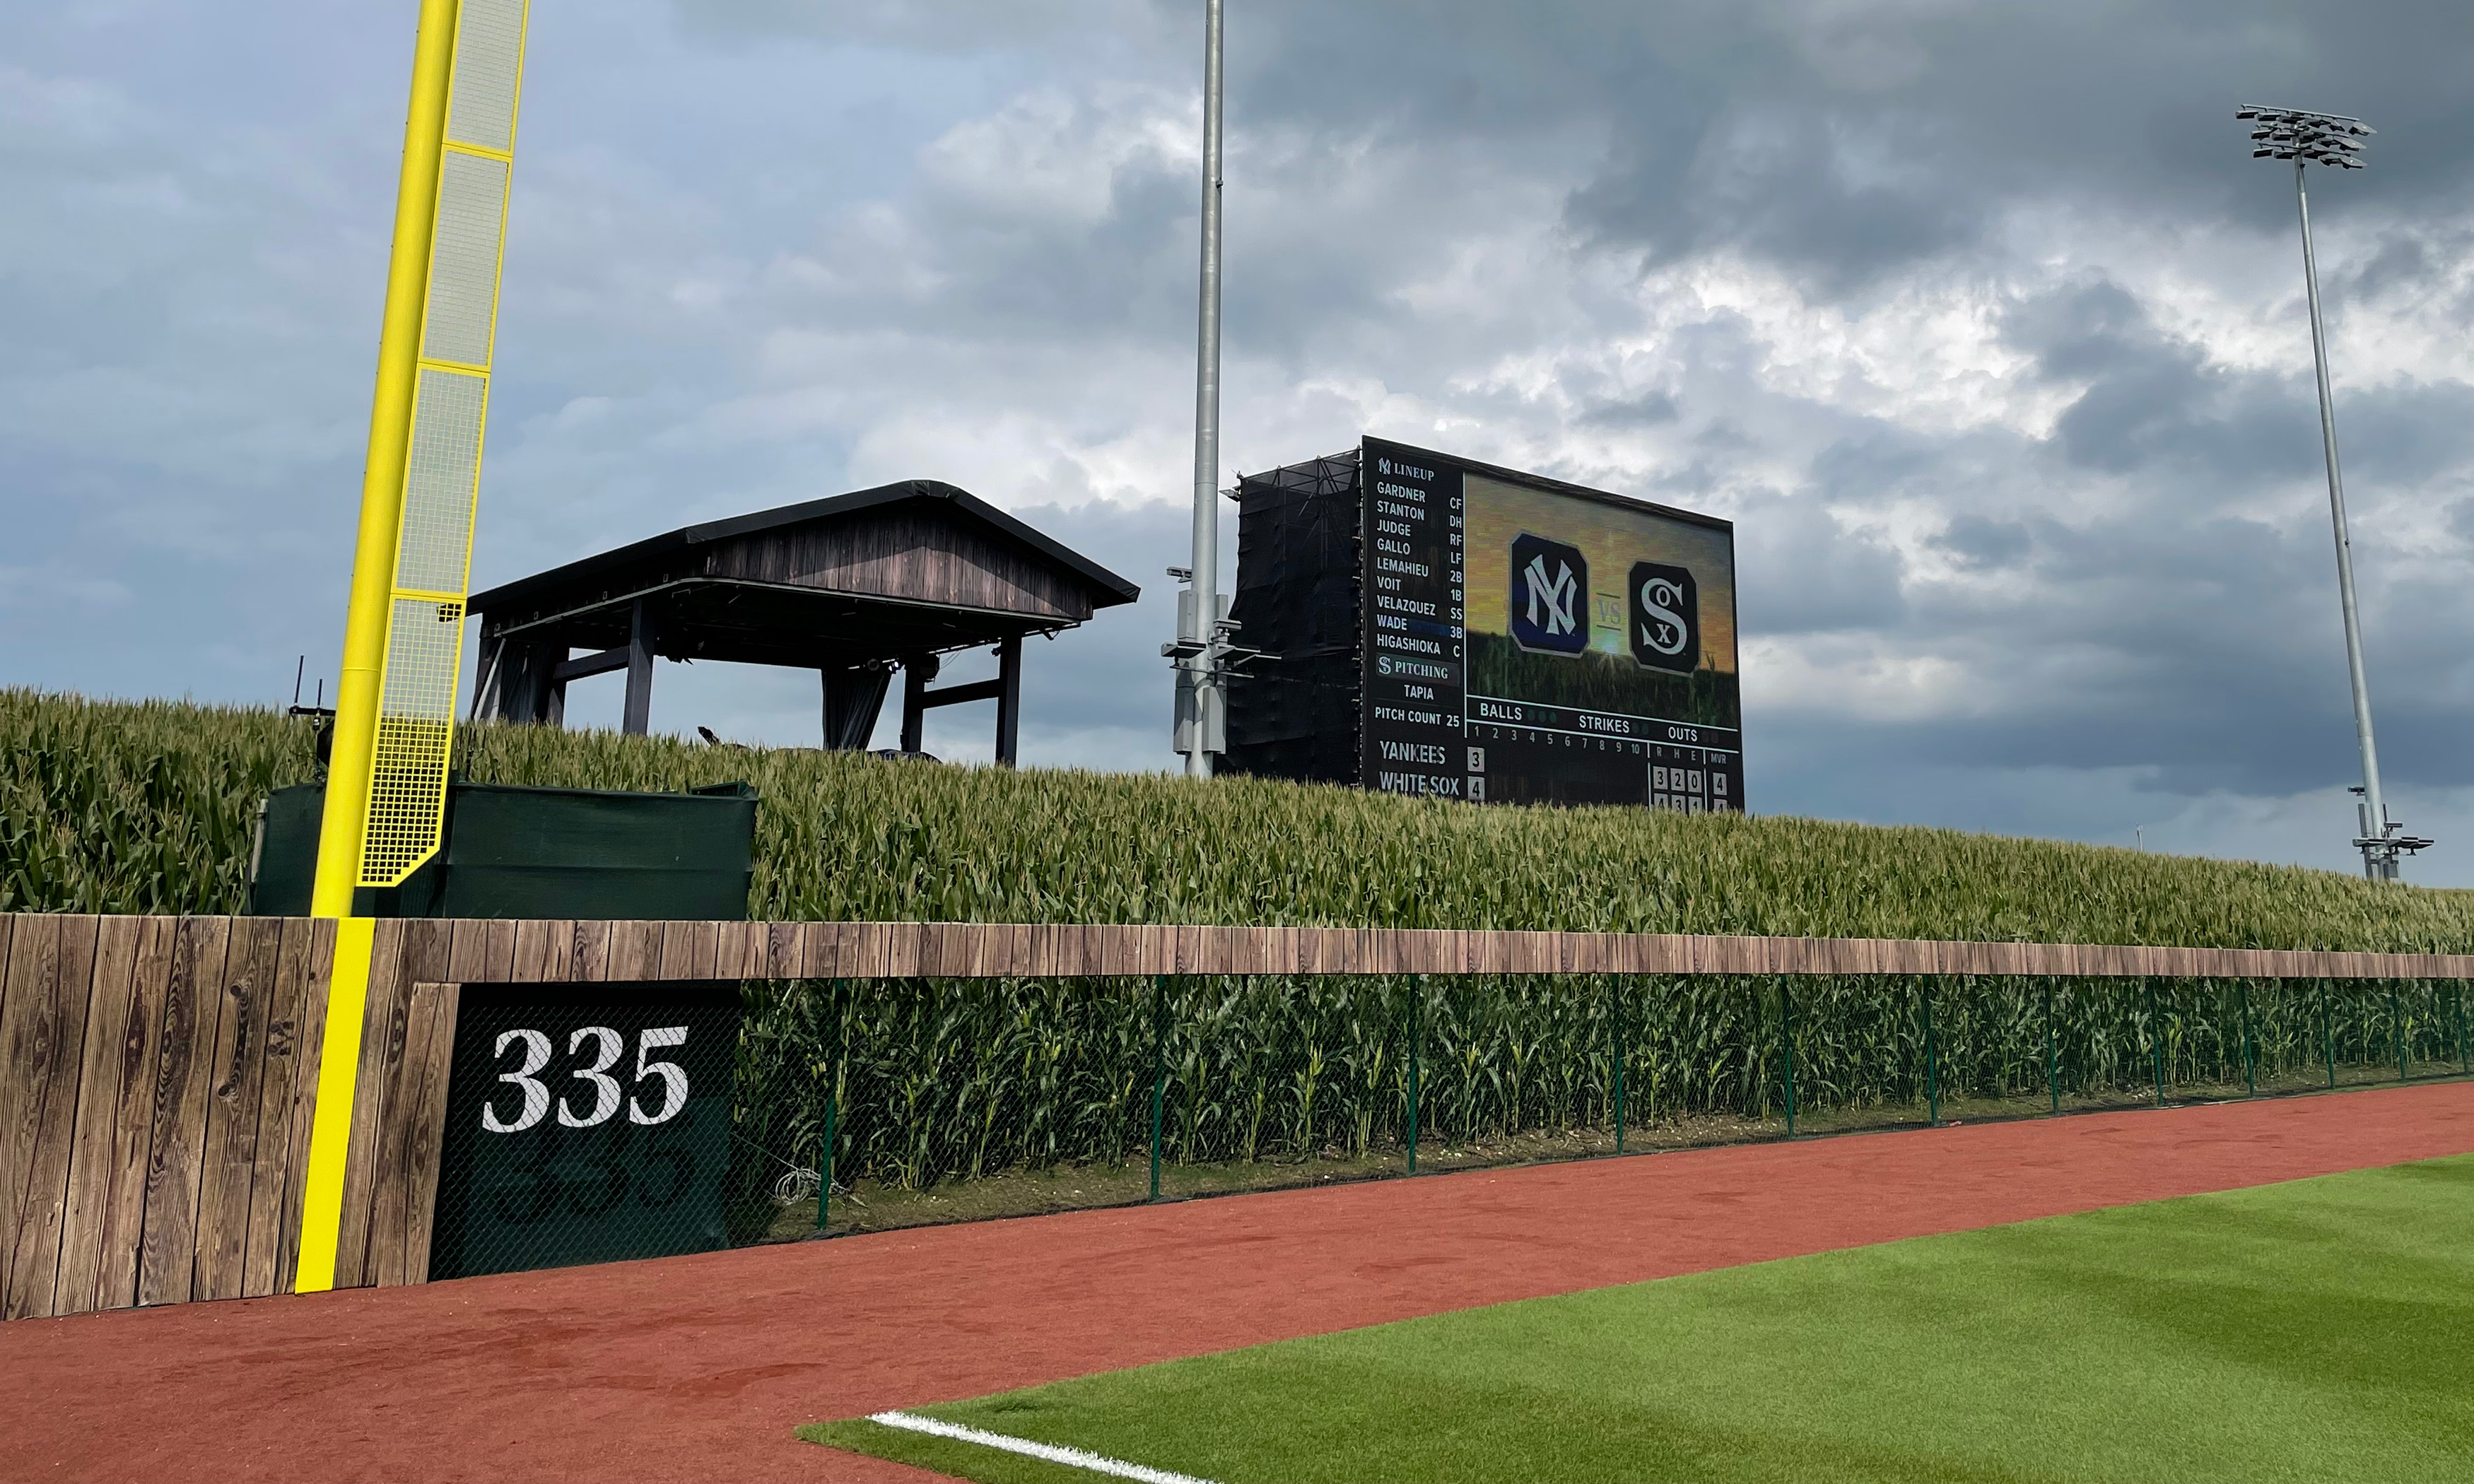 Live From MLB at Field of Dreams: Sports Meets Cinema as Fox Sports  Delivers Epic 4K HDR Production